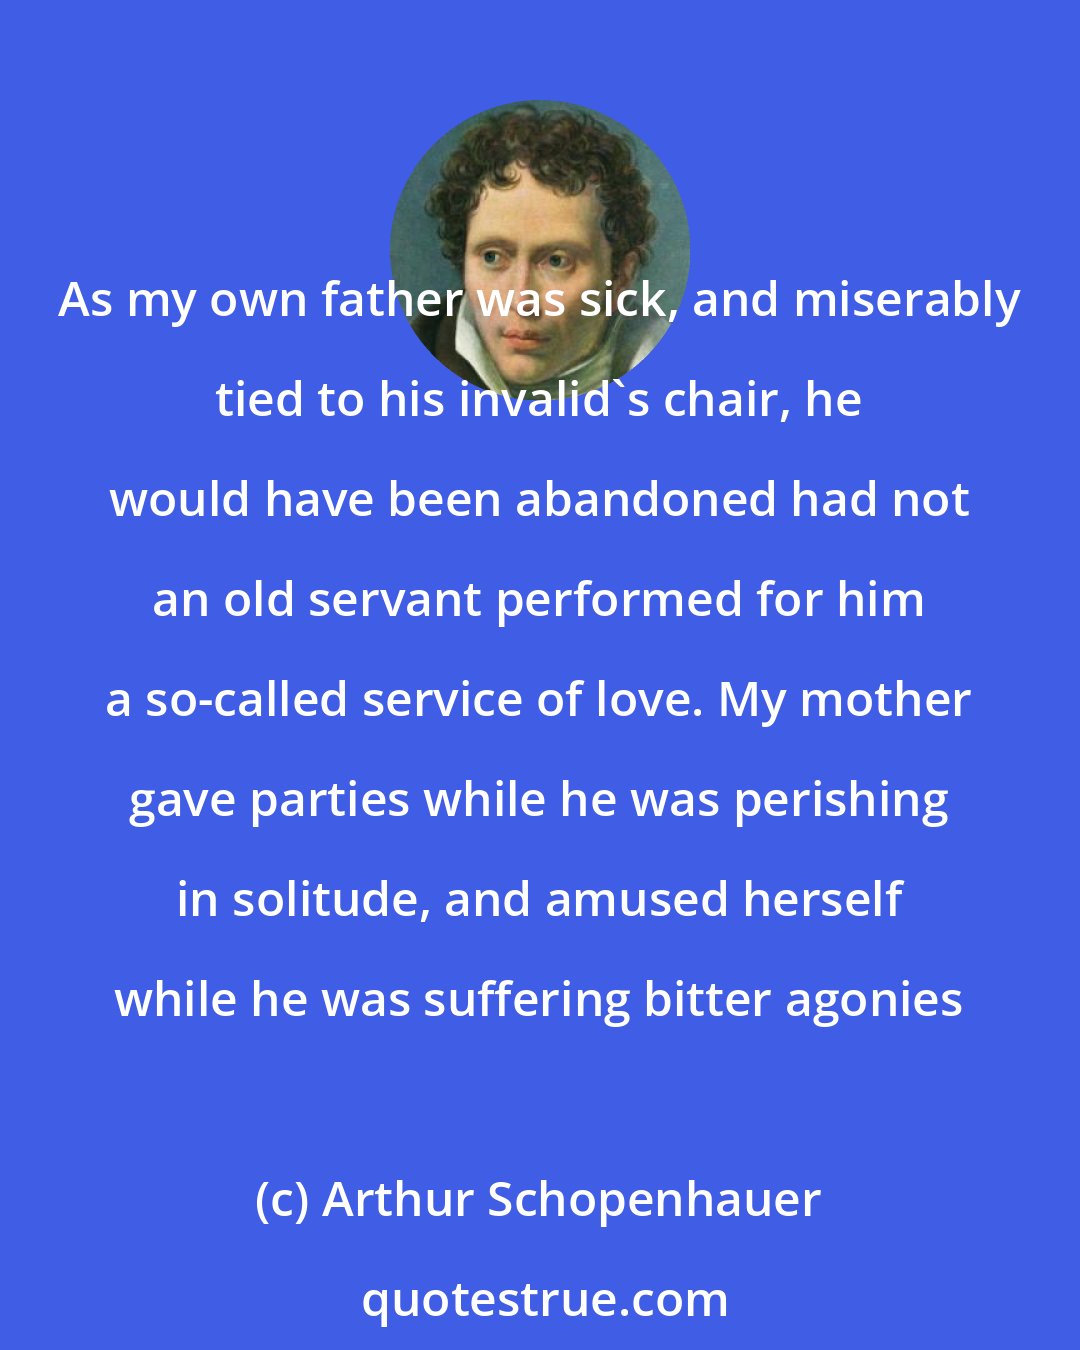 Arthur Schopenhauer: As my own father was sick, and miserably tied to his invalid's chair, he would have been abandoned had not an old servant performed for him a so-called service of love. My mother gave parties while he was perishing in solitude, and amused herself while he was suffering bitter agonies